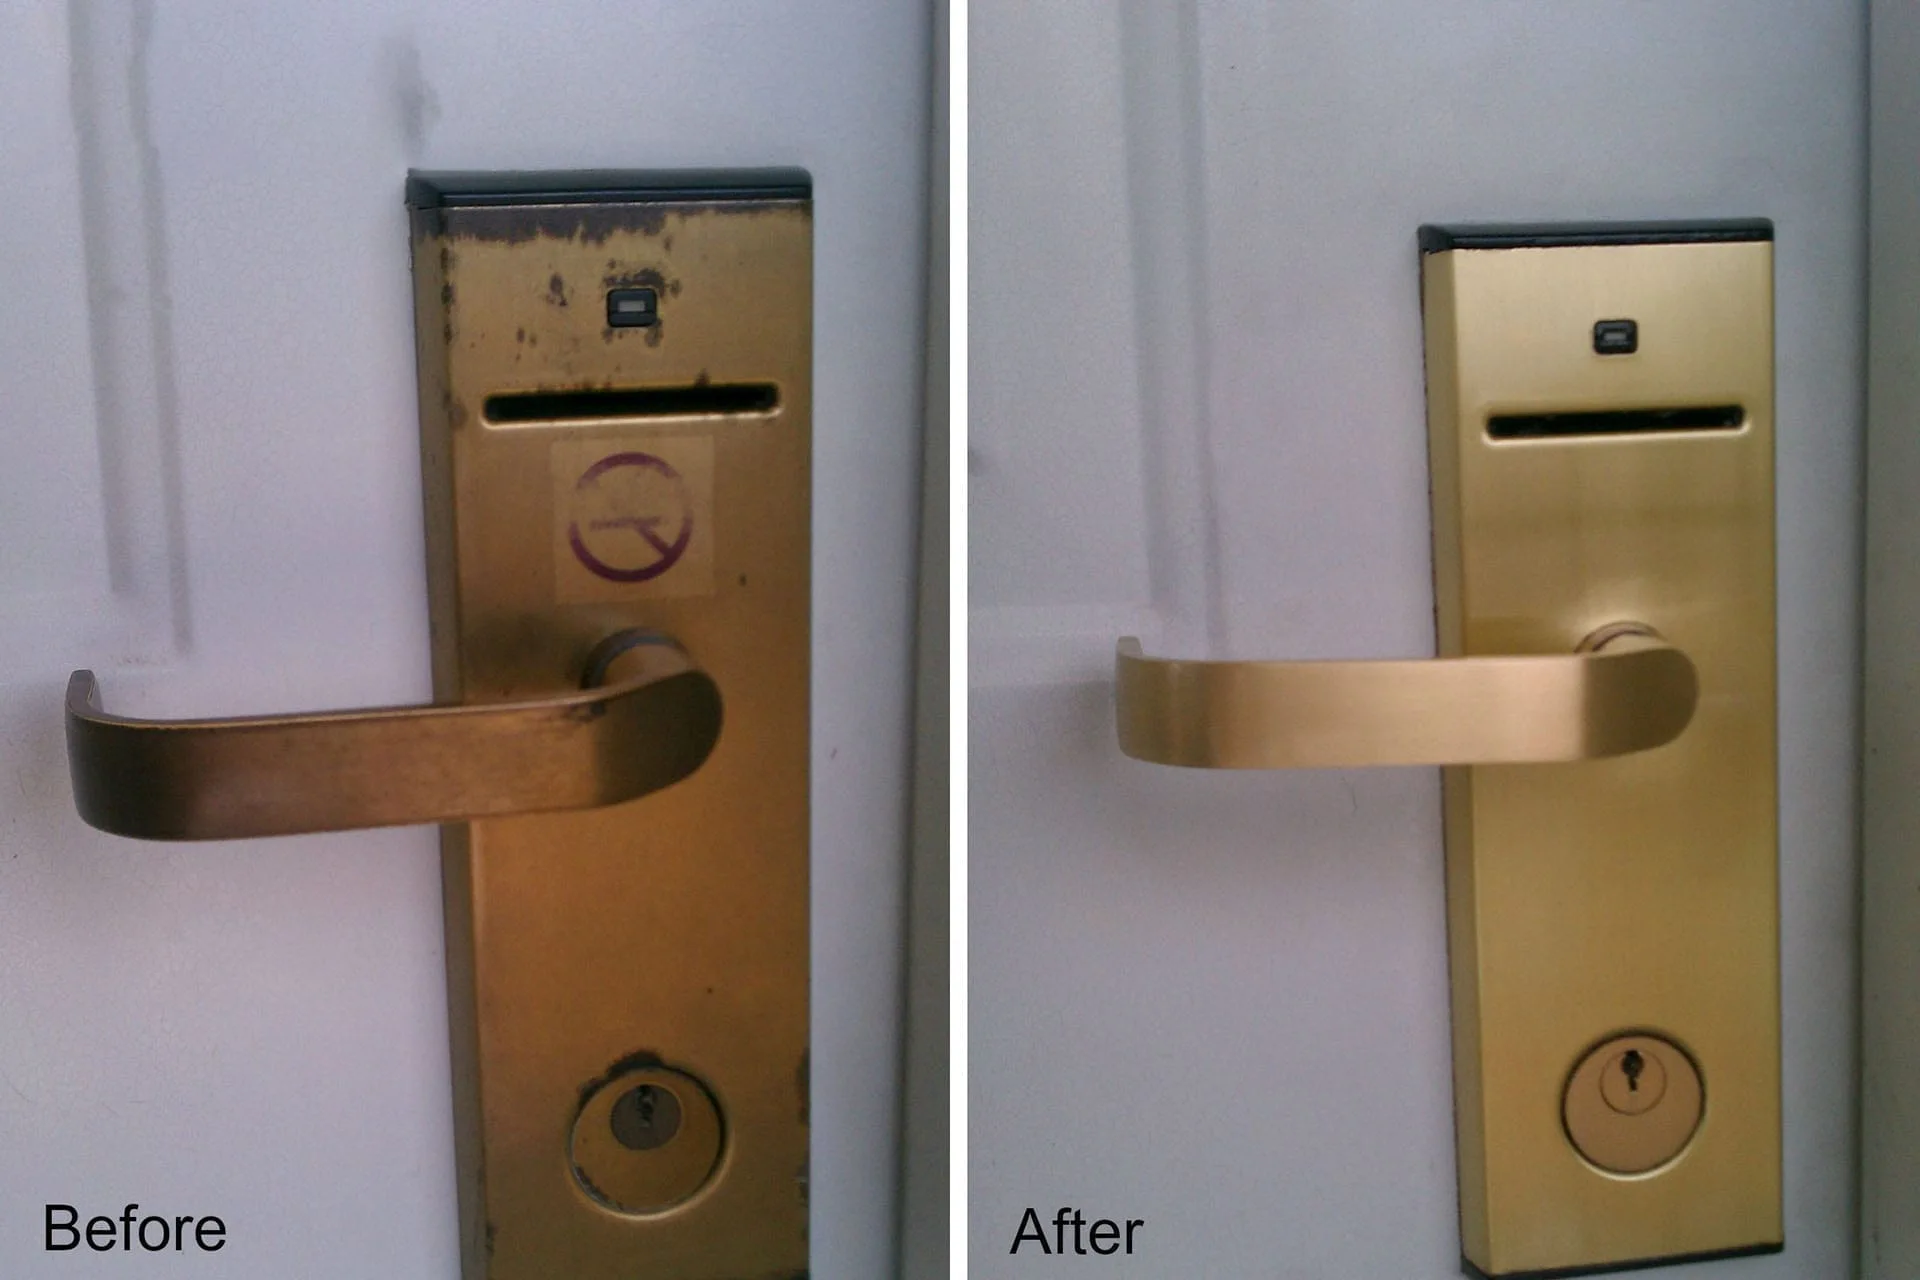 Before and after comparison of refinished hotel room door handles with keycard slot